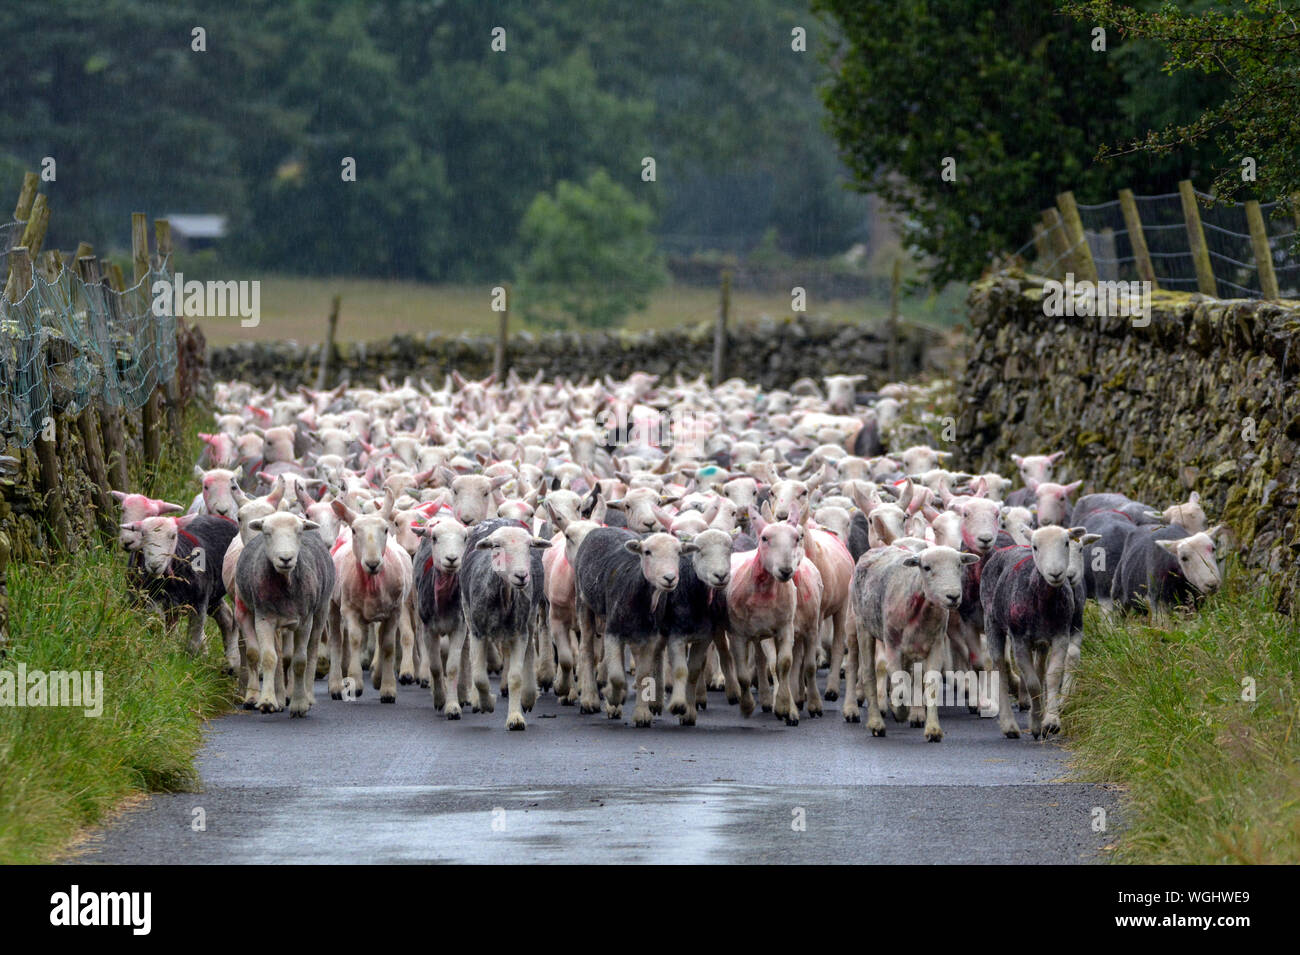 Flock Of Sheep On Road Against Trees Stock Photo